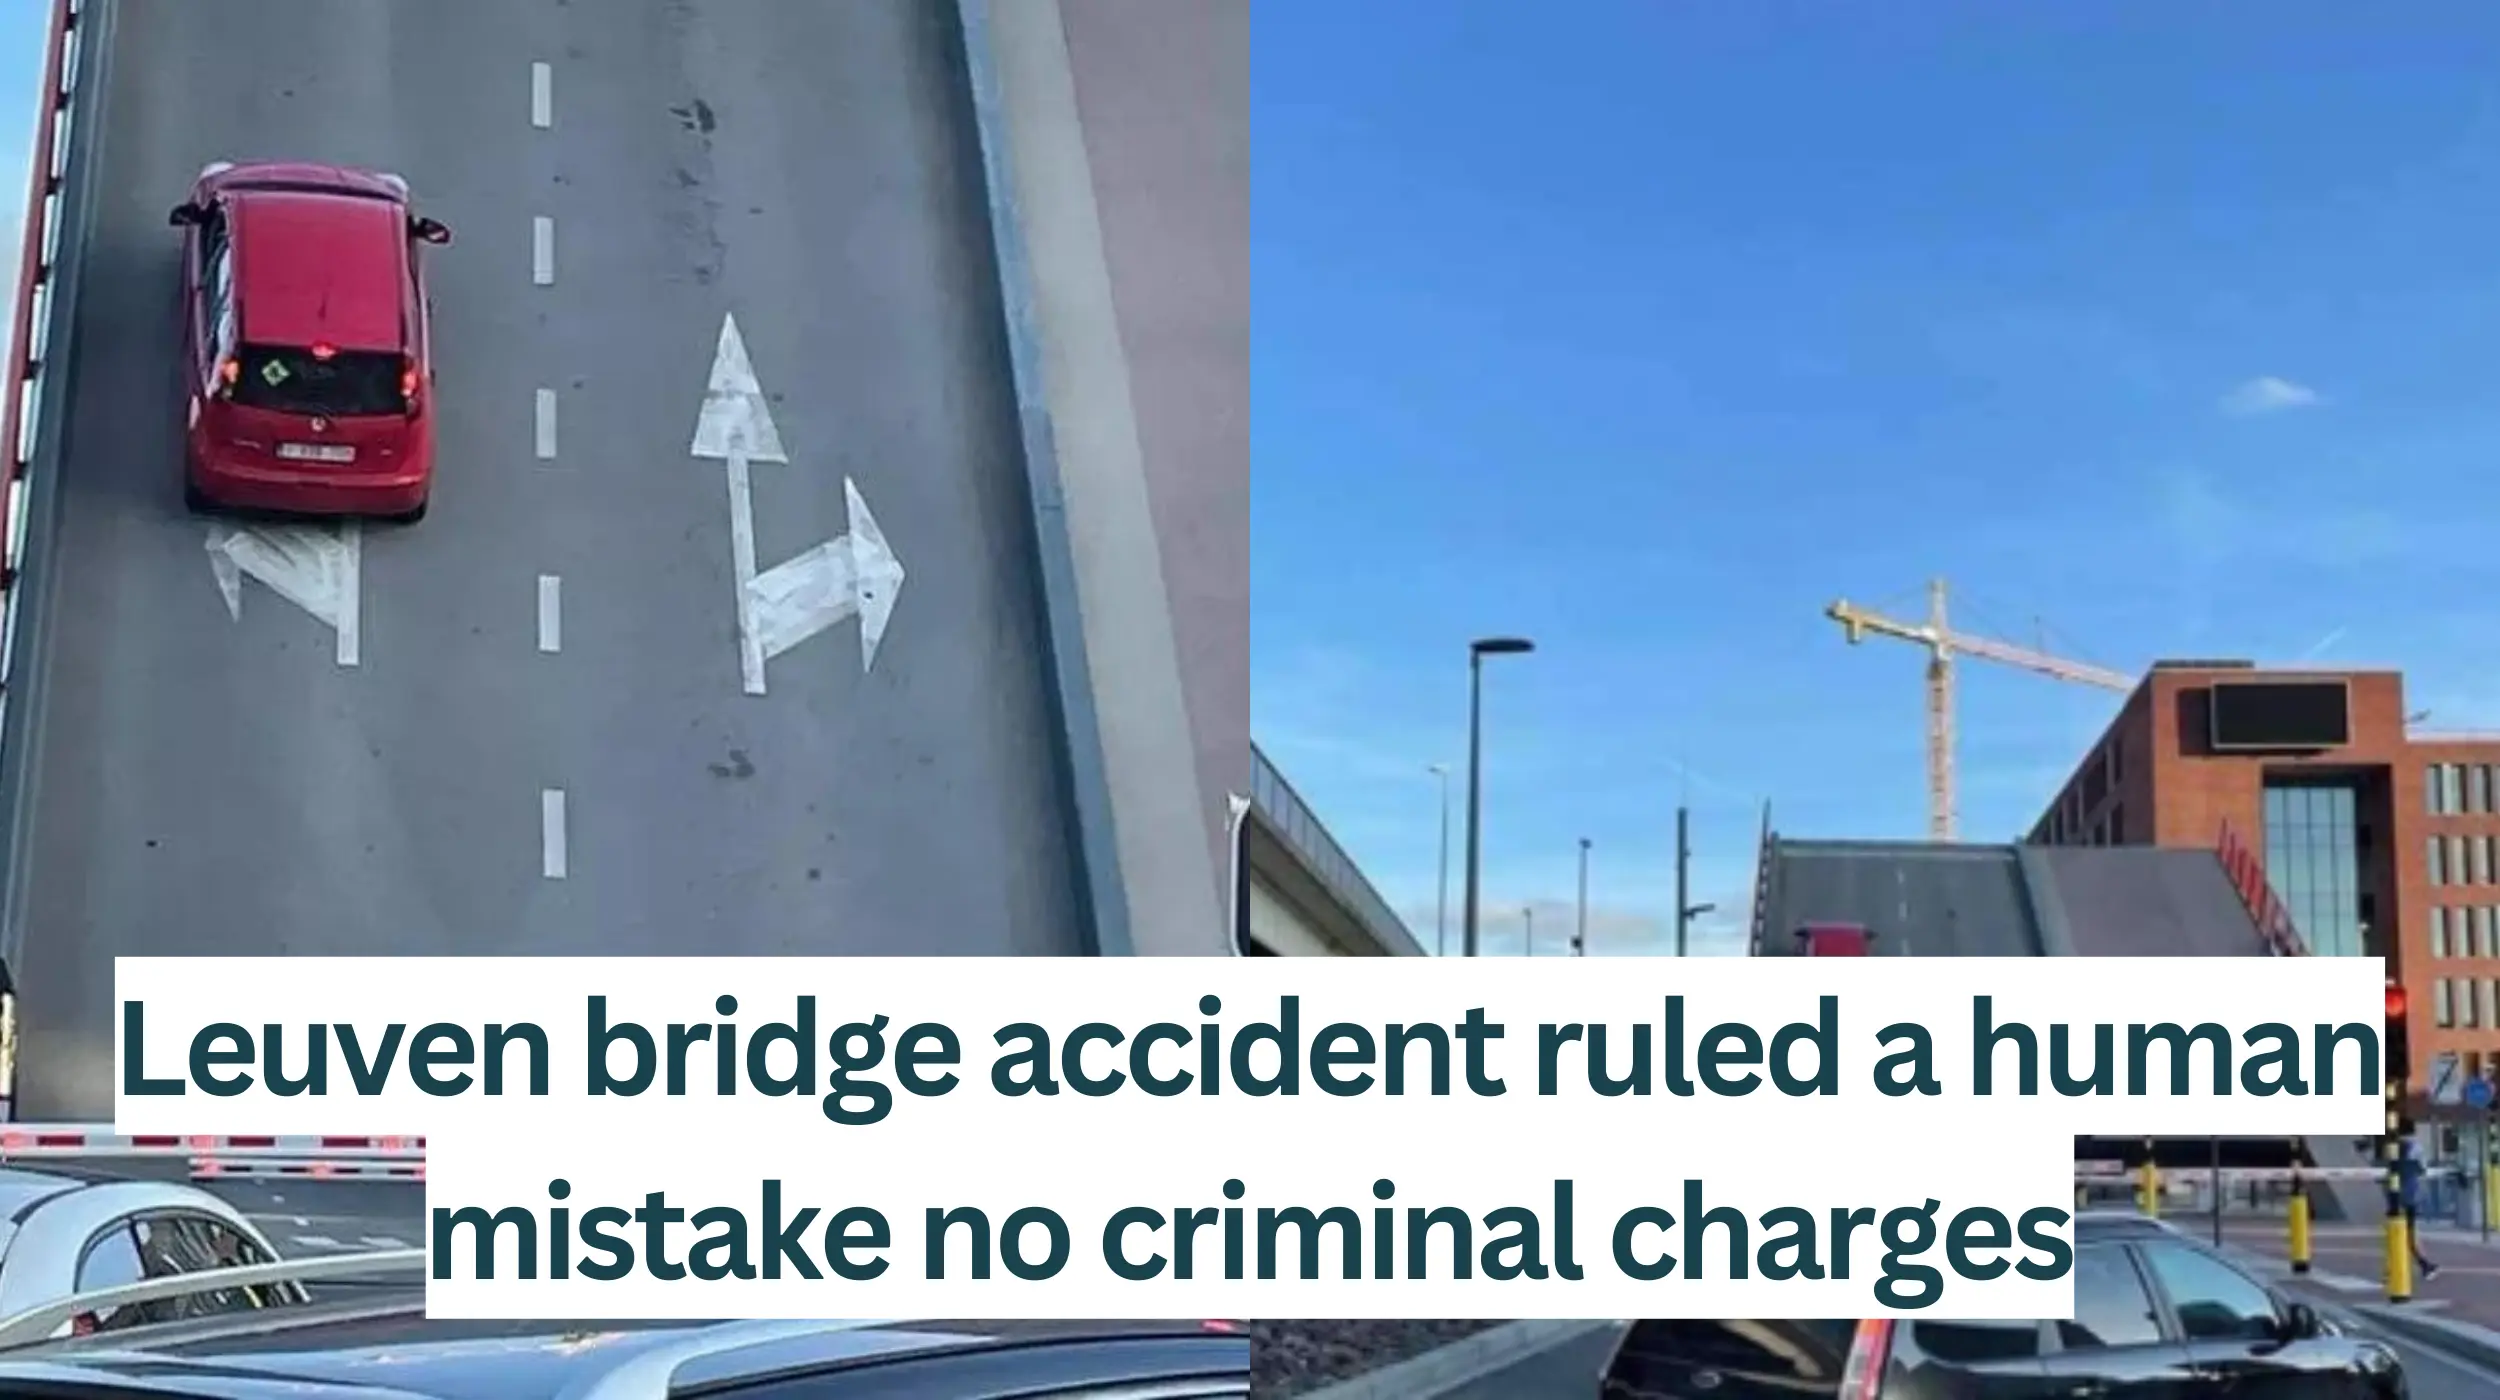 Leuven-bridge-accident-ruled-a-human-mistake-no-criminal-charges